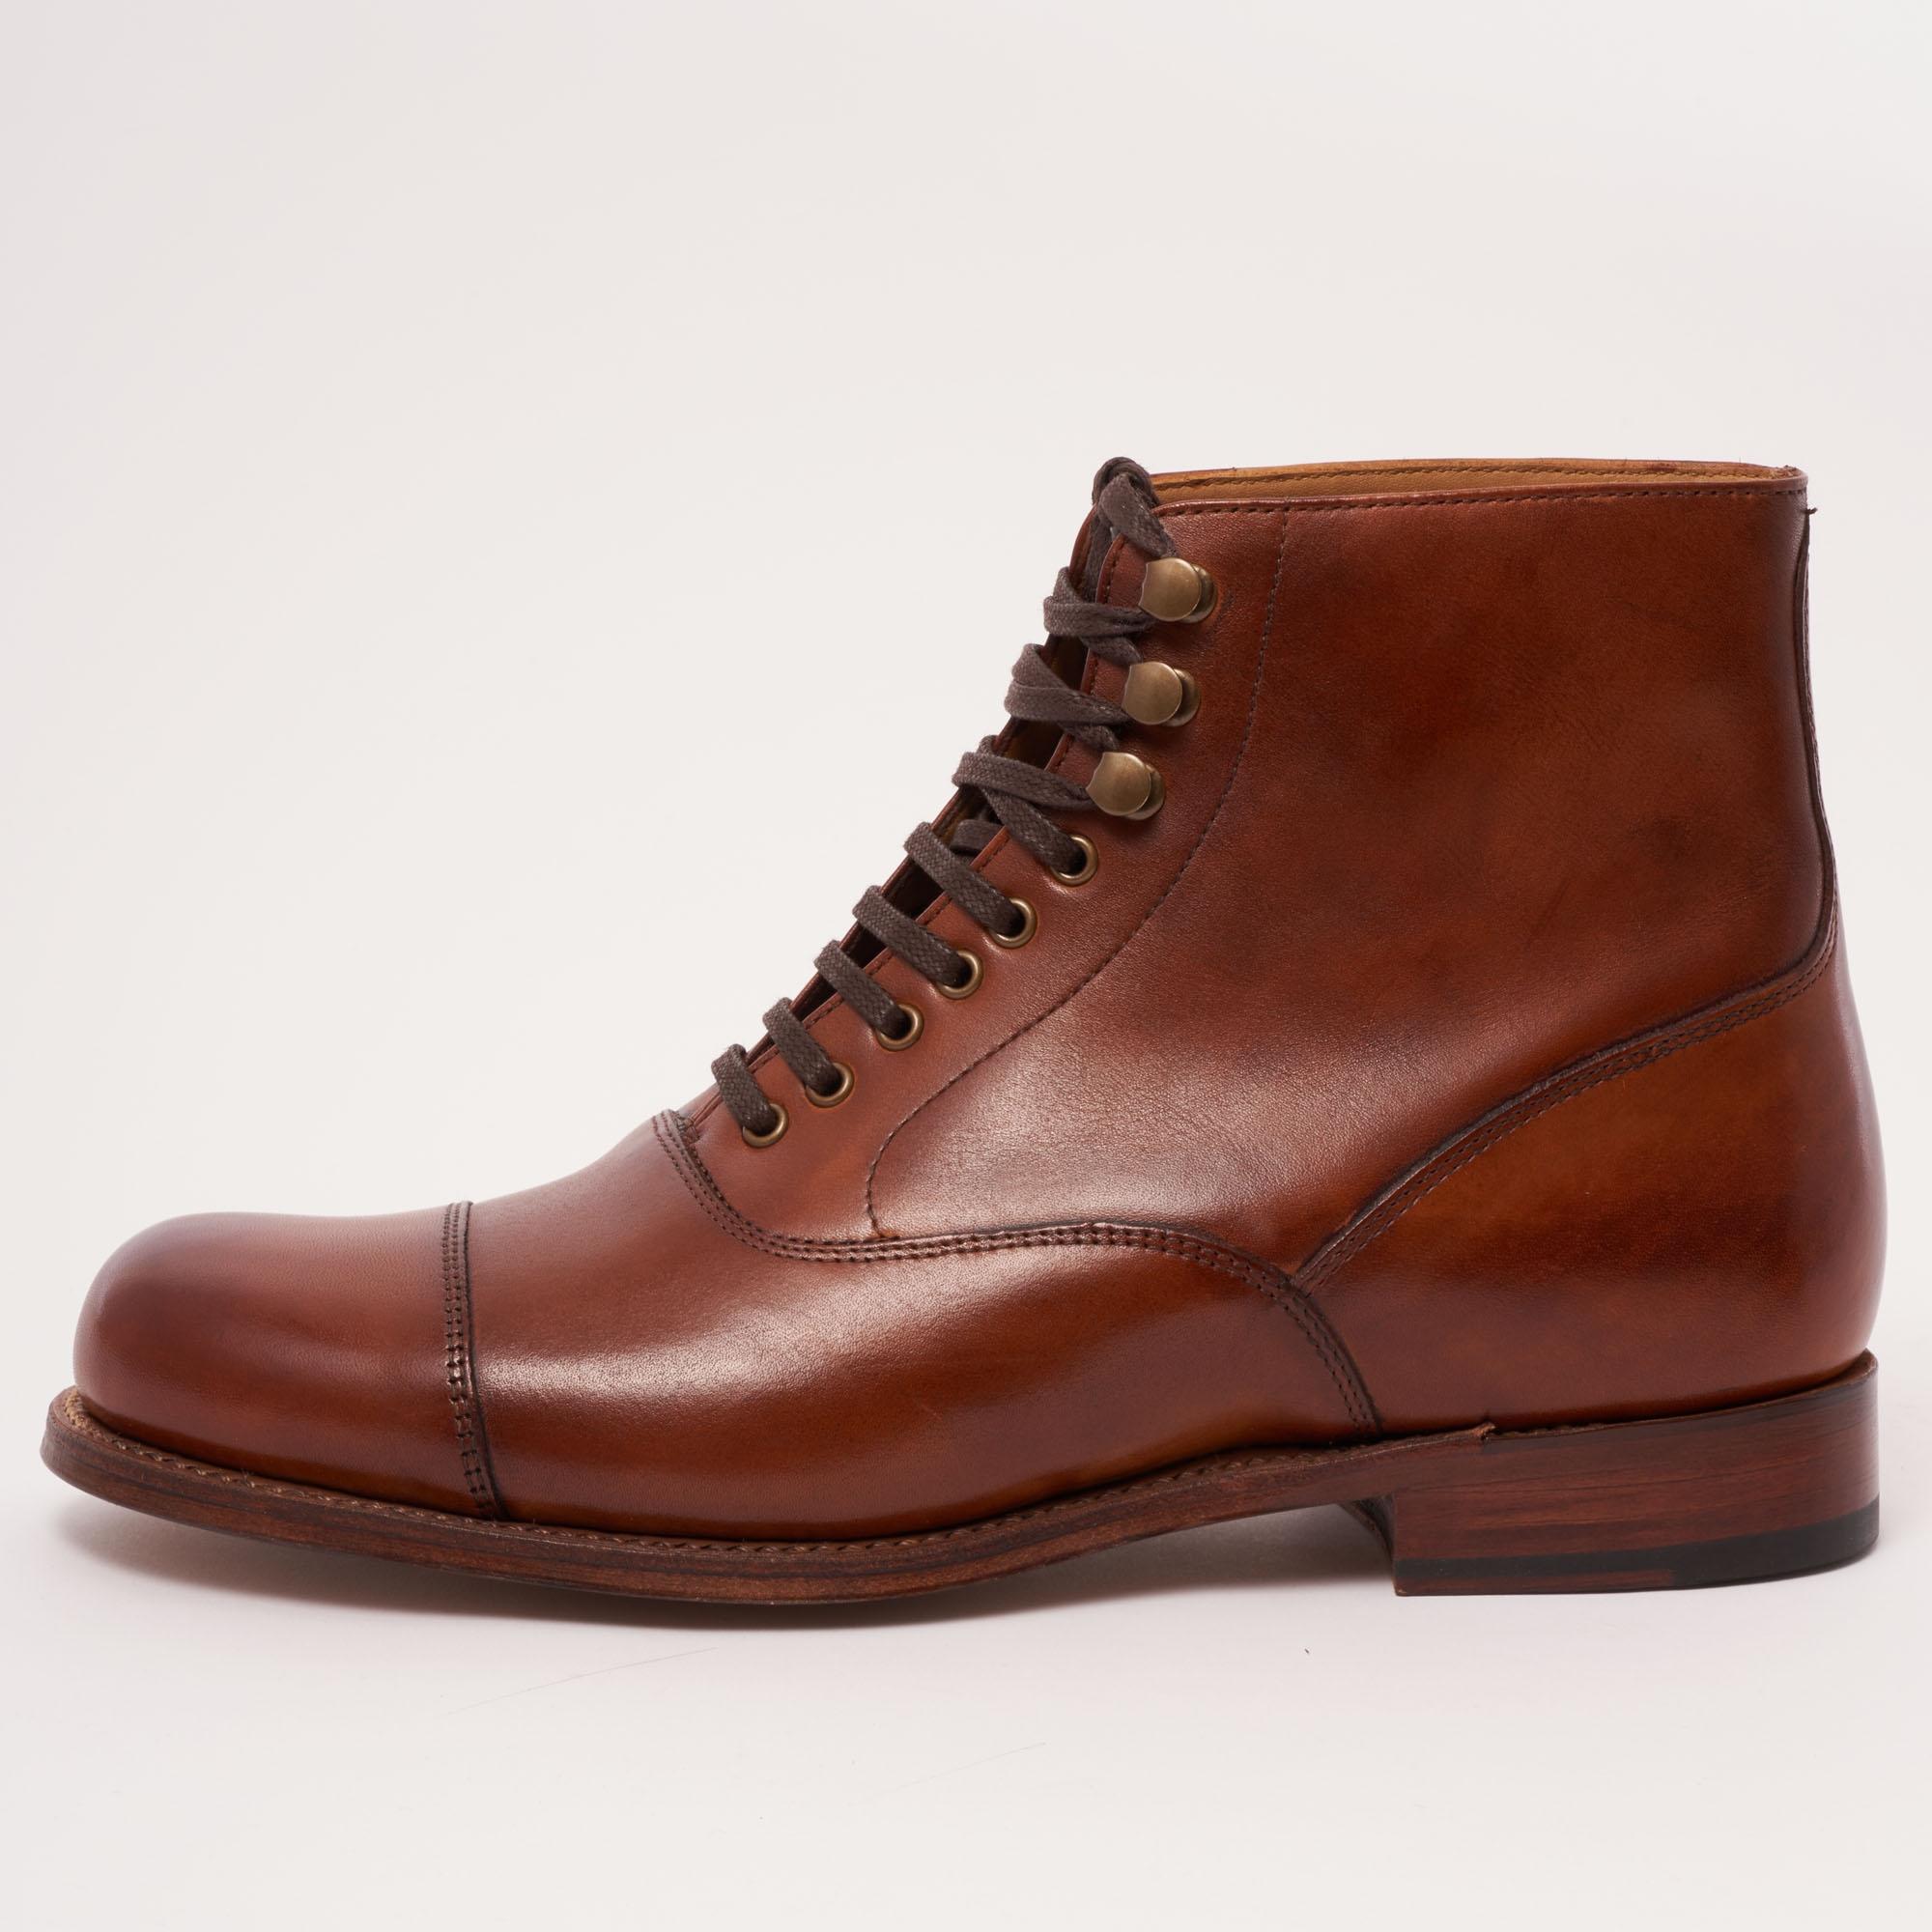 Grenson Leather Leander Oxford Boot in Brown for Men - Lyst